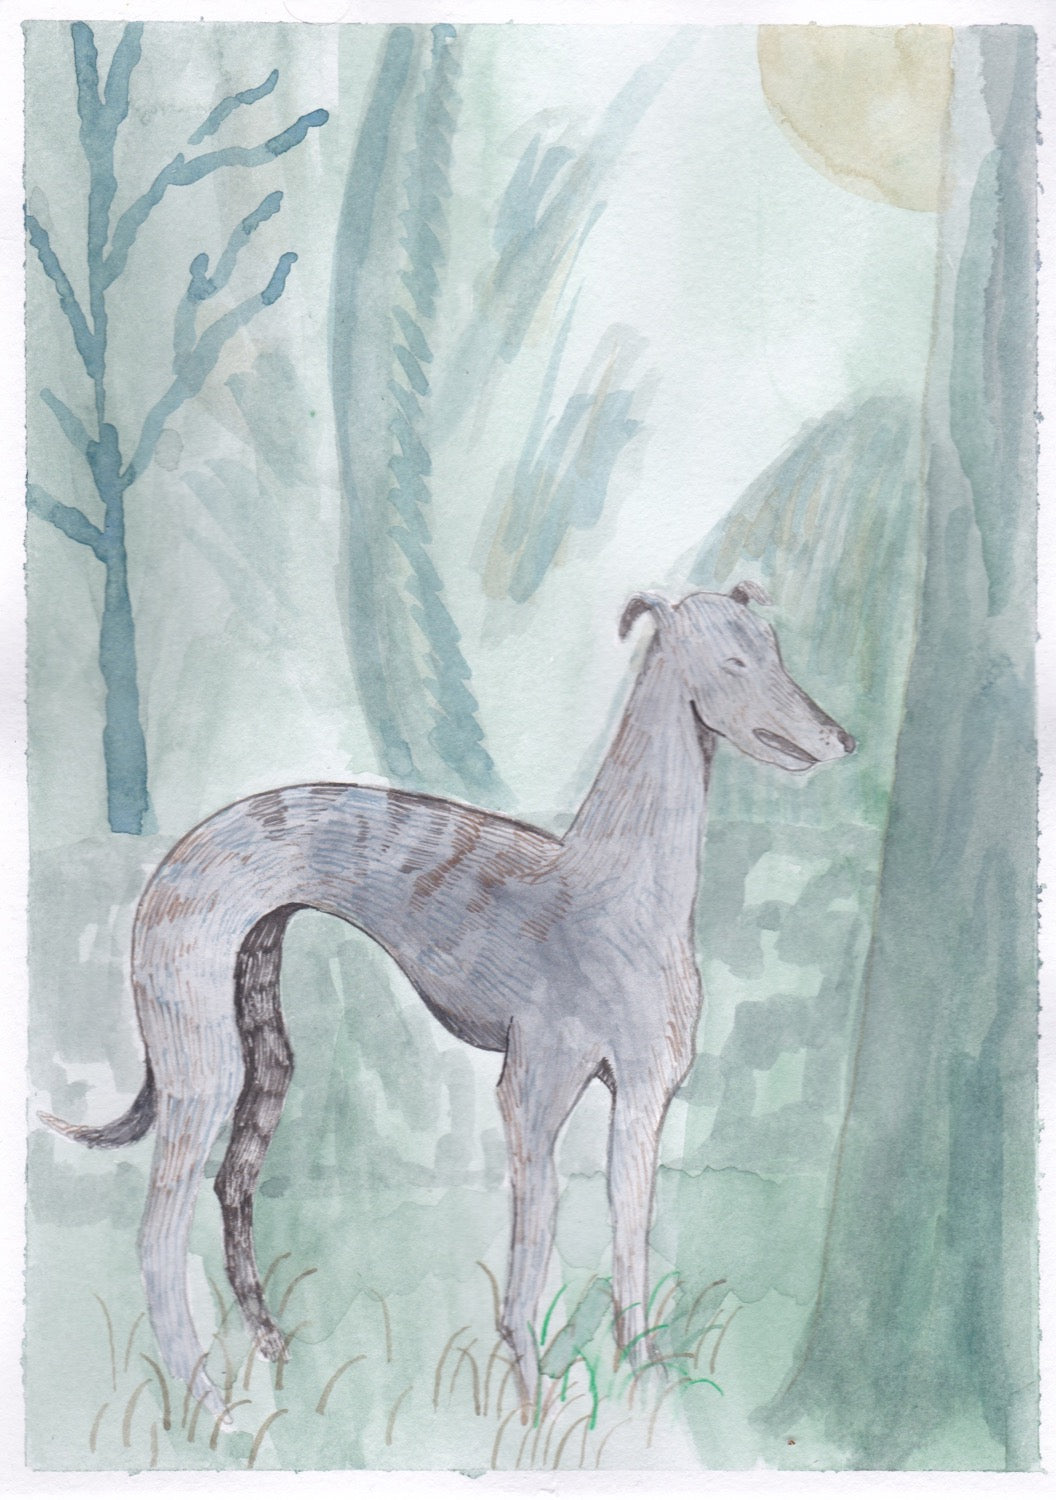 Walk In The Park | James Owens | Watercolour on Paper | Partnership Editions